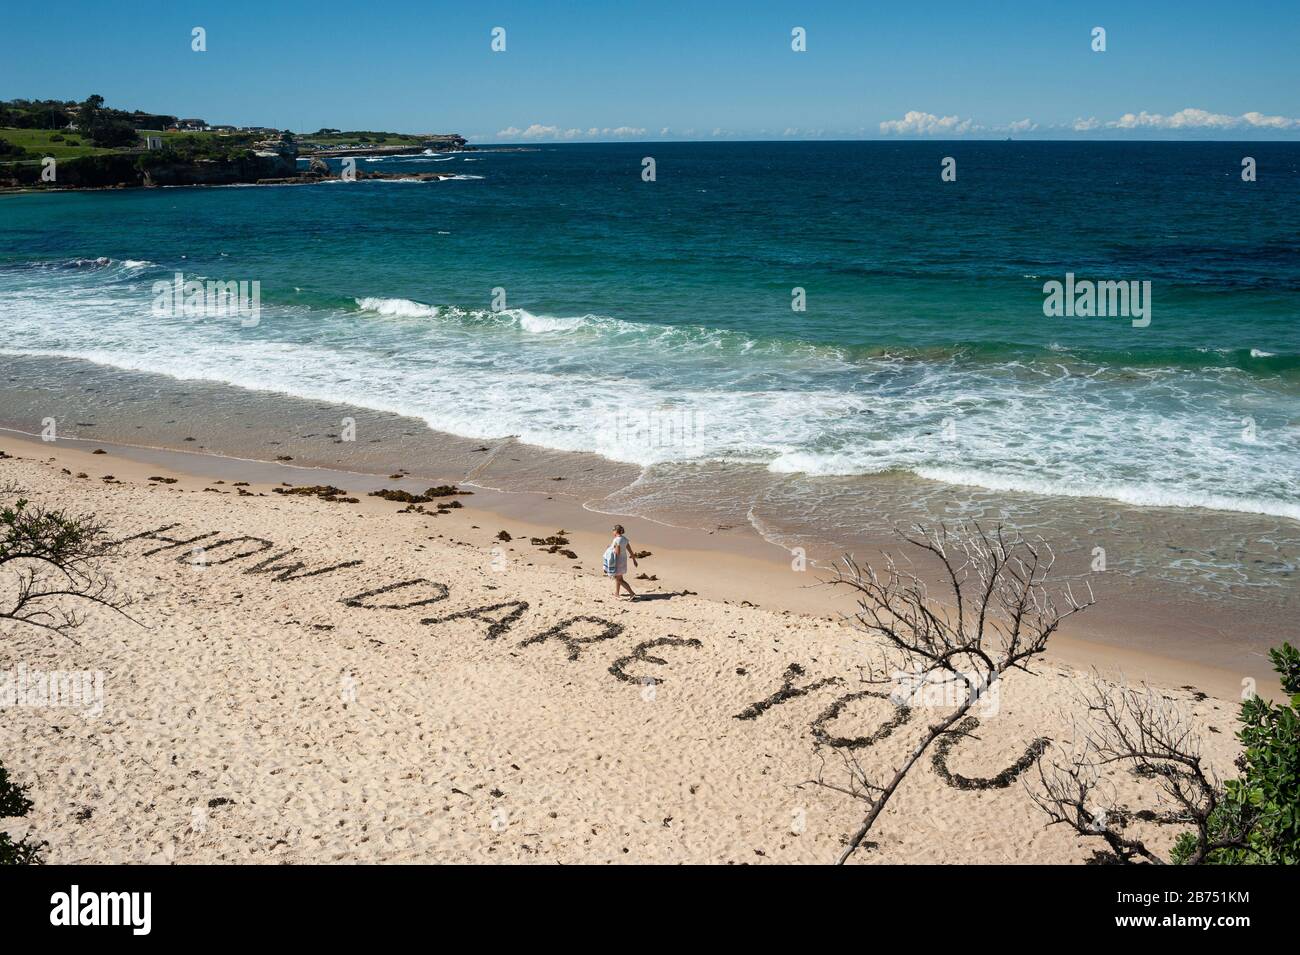 24.09.2019, Sydney, New South Wales, Australia - A woman walks along the beach at Coogee Beach, where the slogan How Dare You? is written in the sand. This quote by Swedish climate activist Greta Thunberg spread around the world after her speech at the UN in New York. [automated translation] Stock Photo